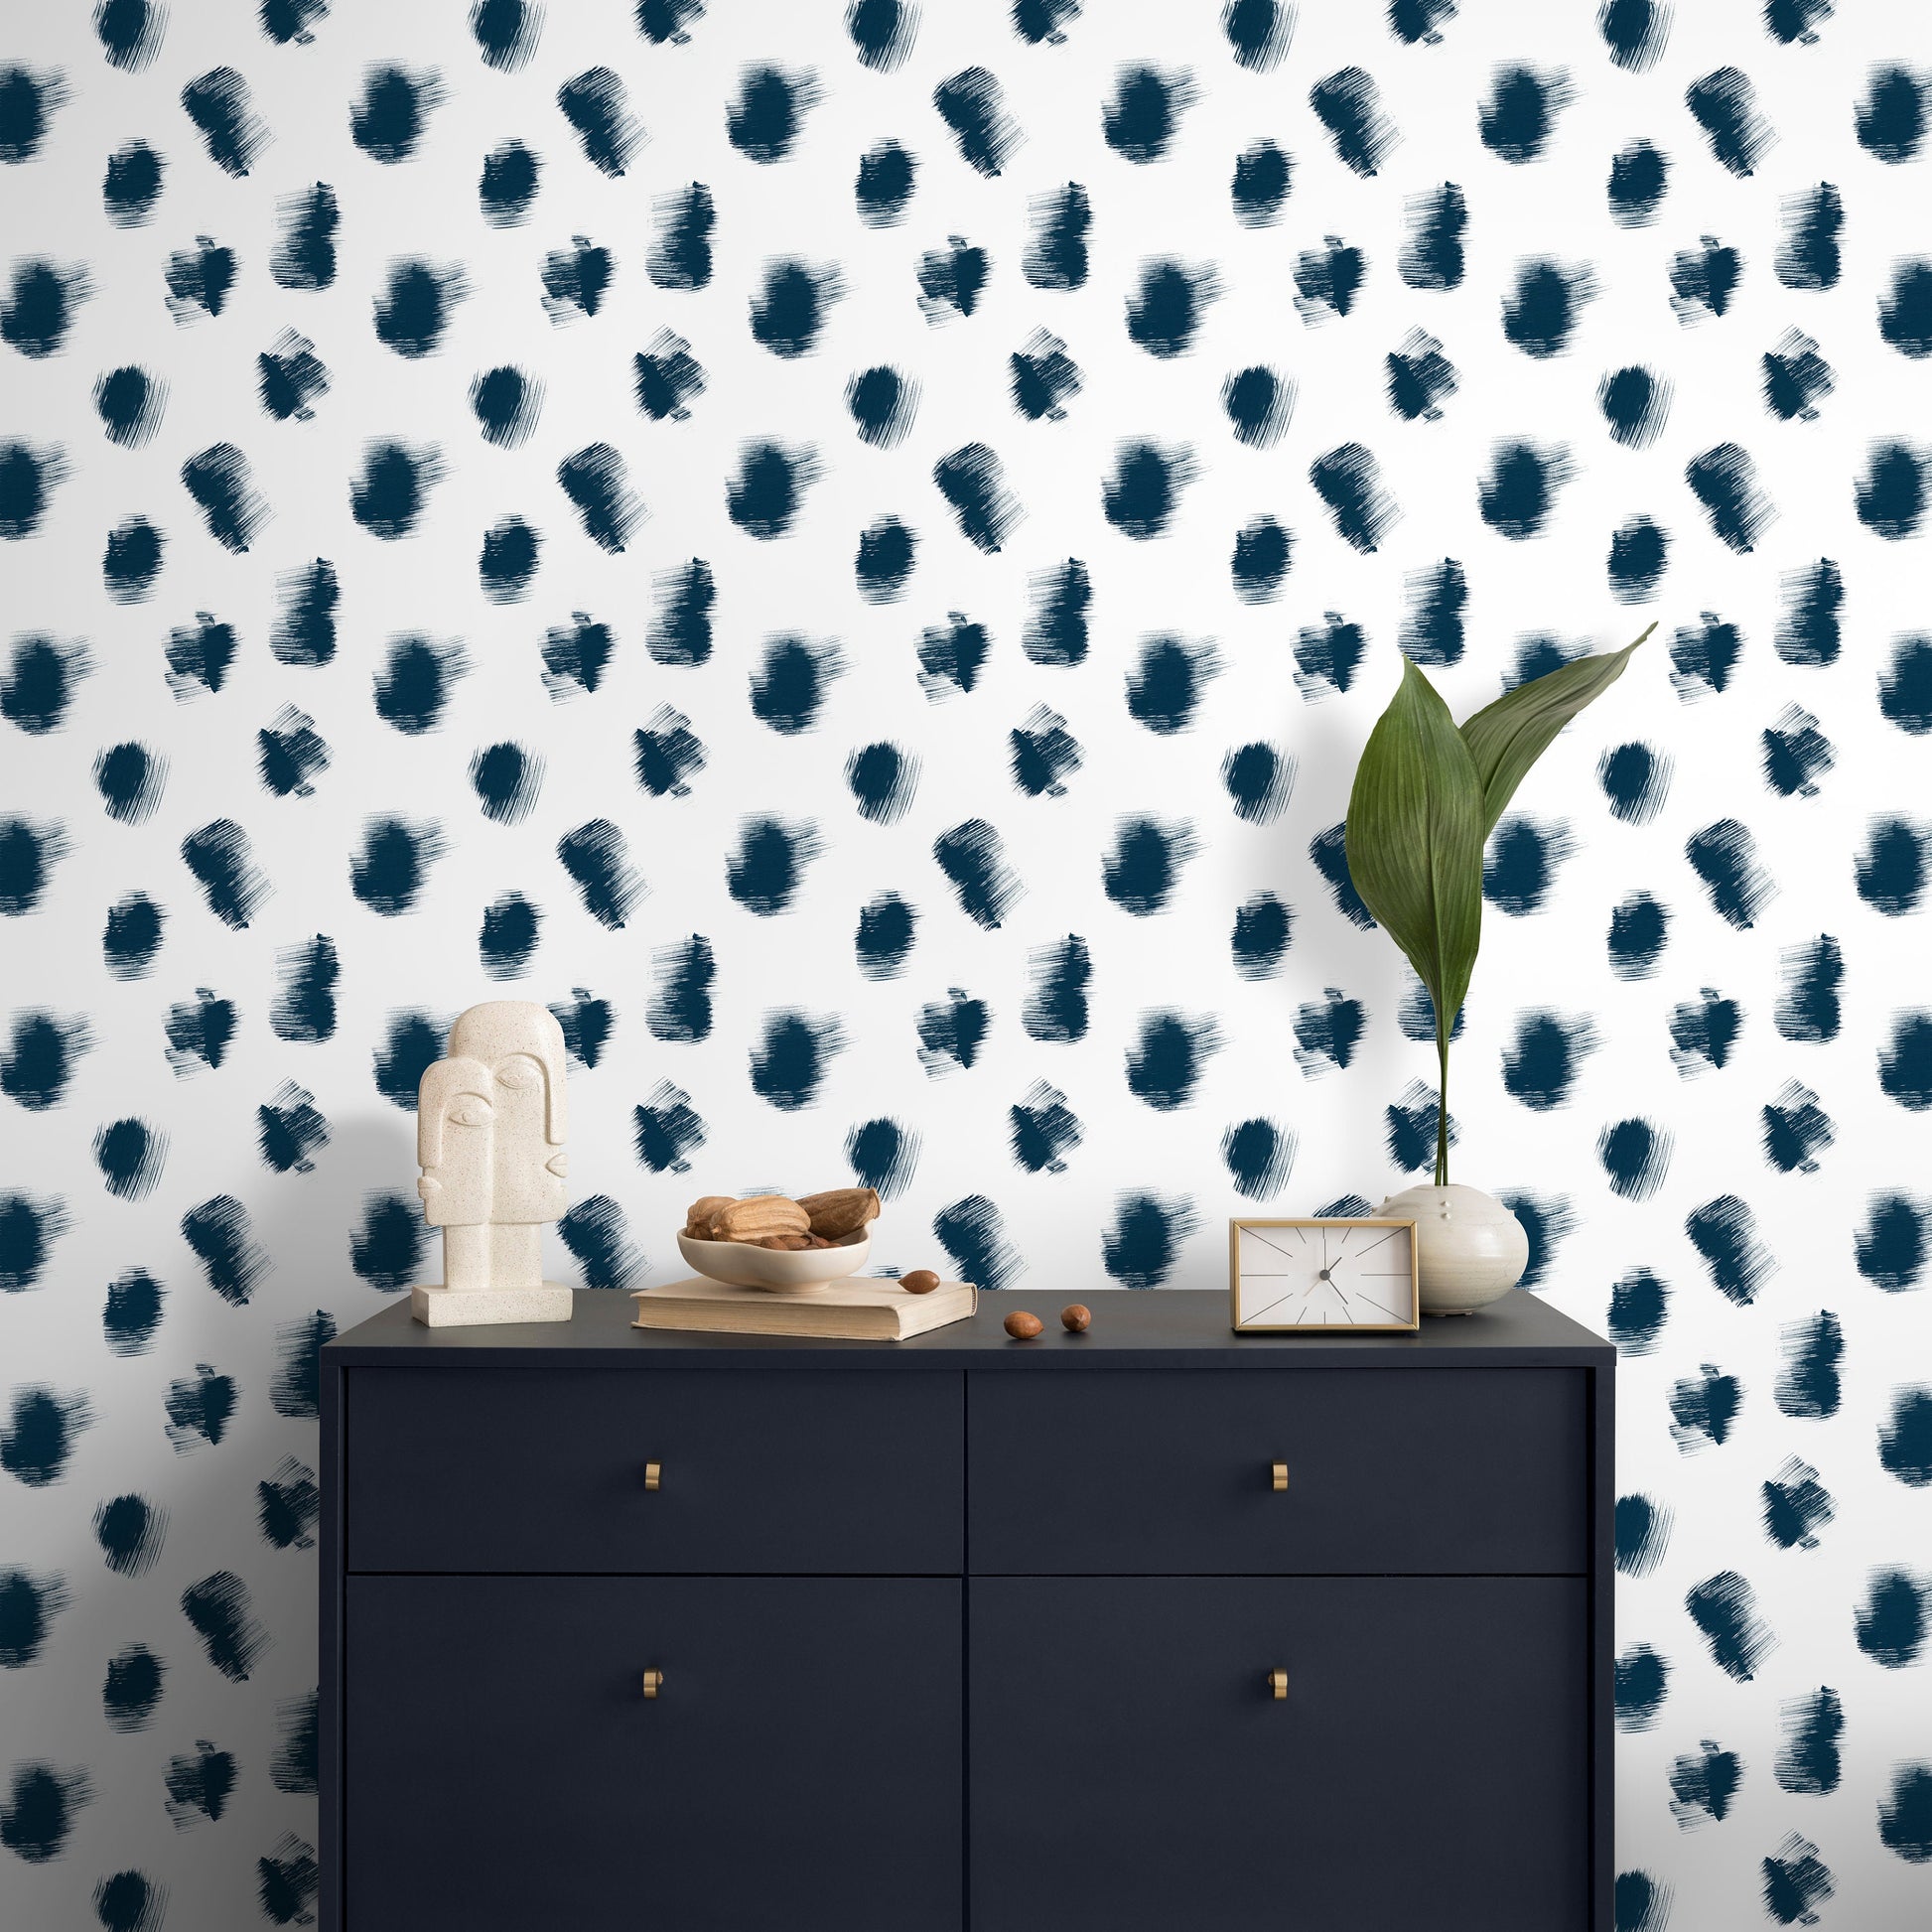 Navy and White Speckle Dots Wallpaper / Peel and Stick Wallpaper Removable Wallpaper Home Decor Wall Art Wall Decor Room Decor - C896